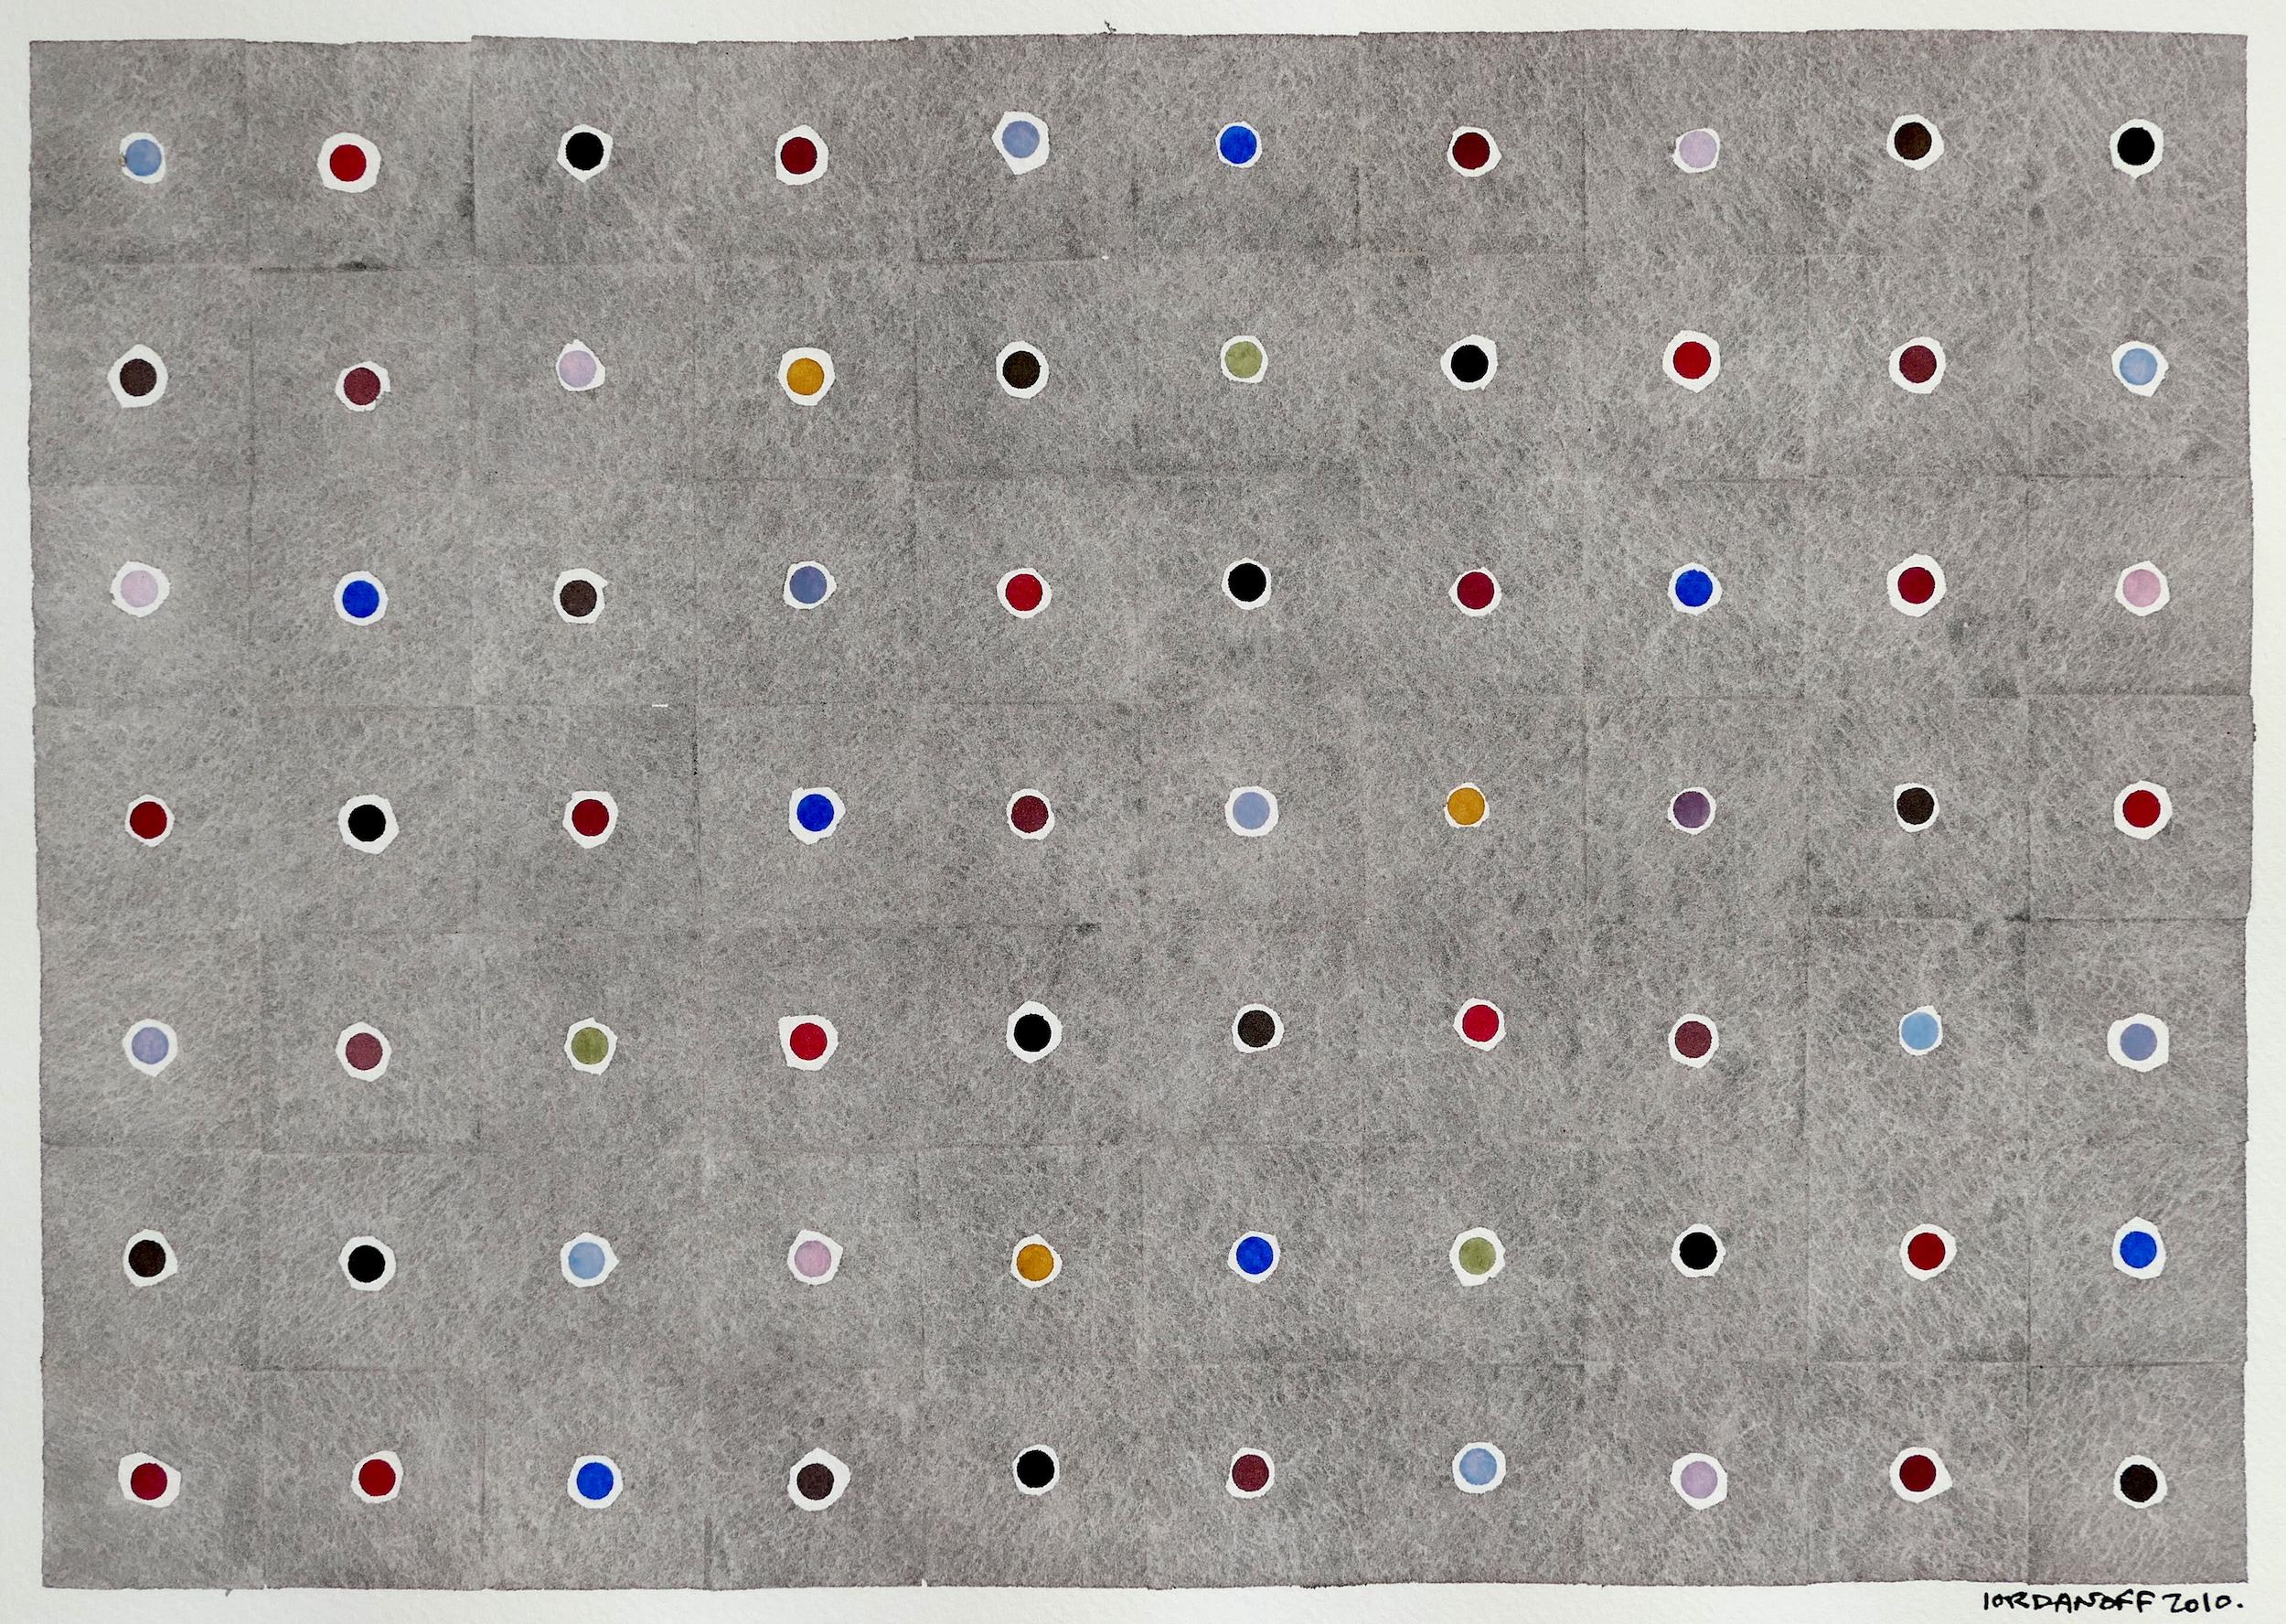 569 - Punch - Gray Abstract Painting by Jérémie Iordanoff